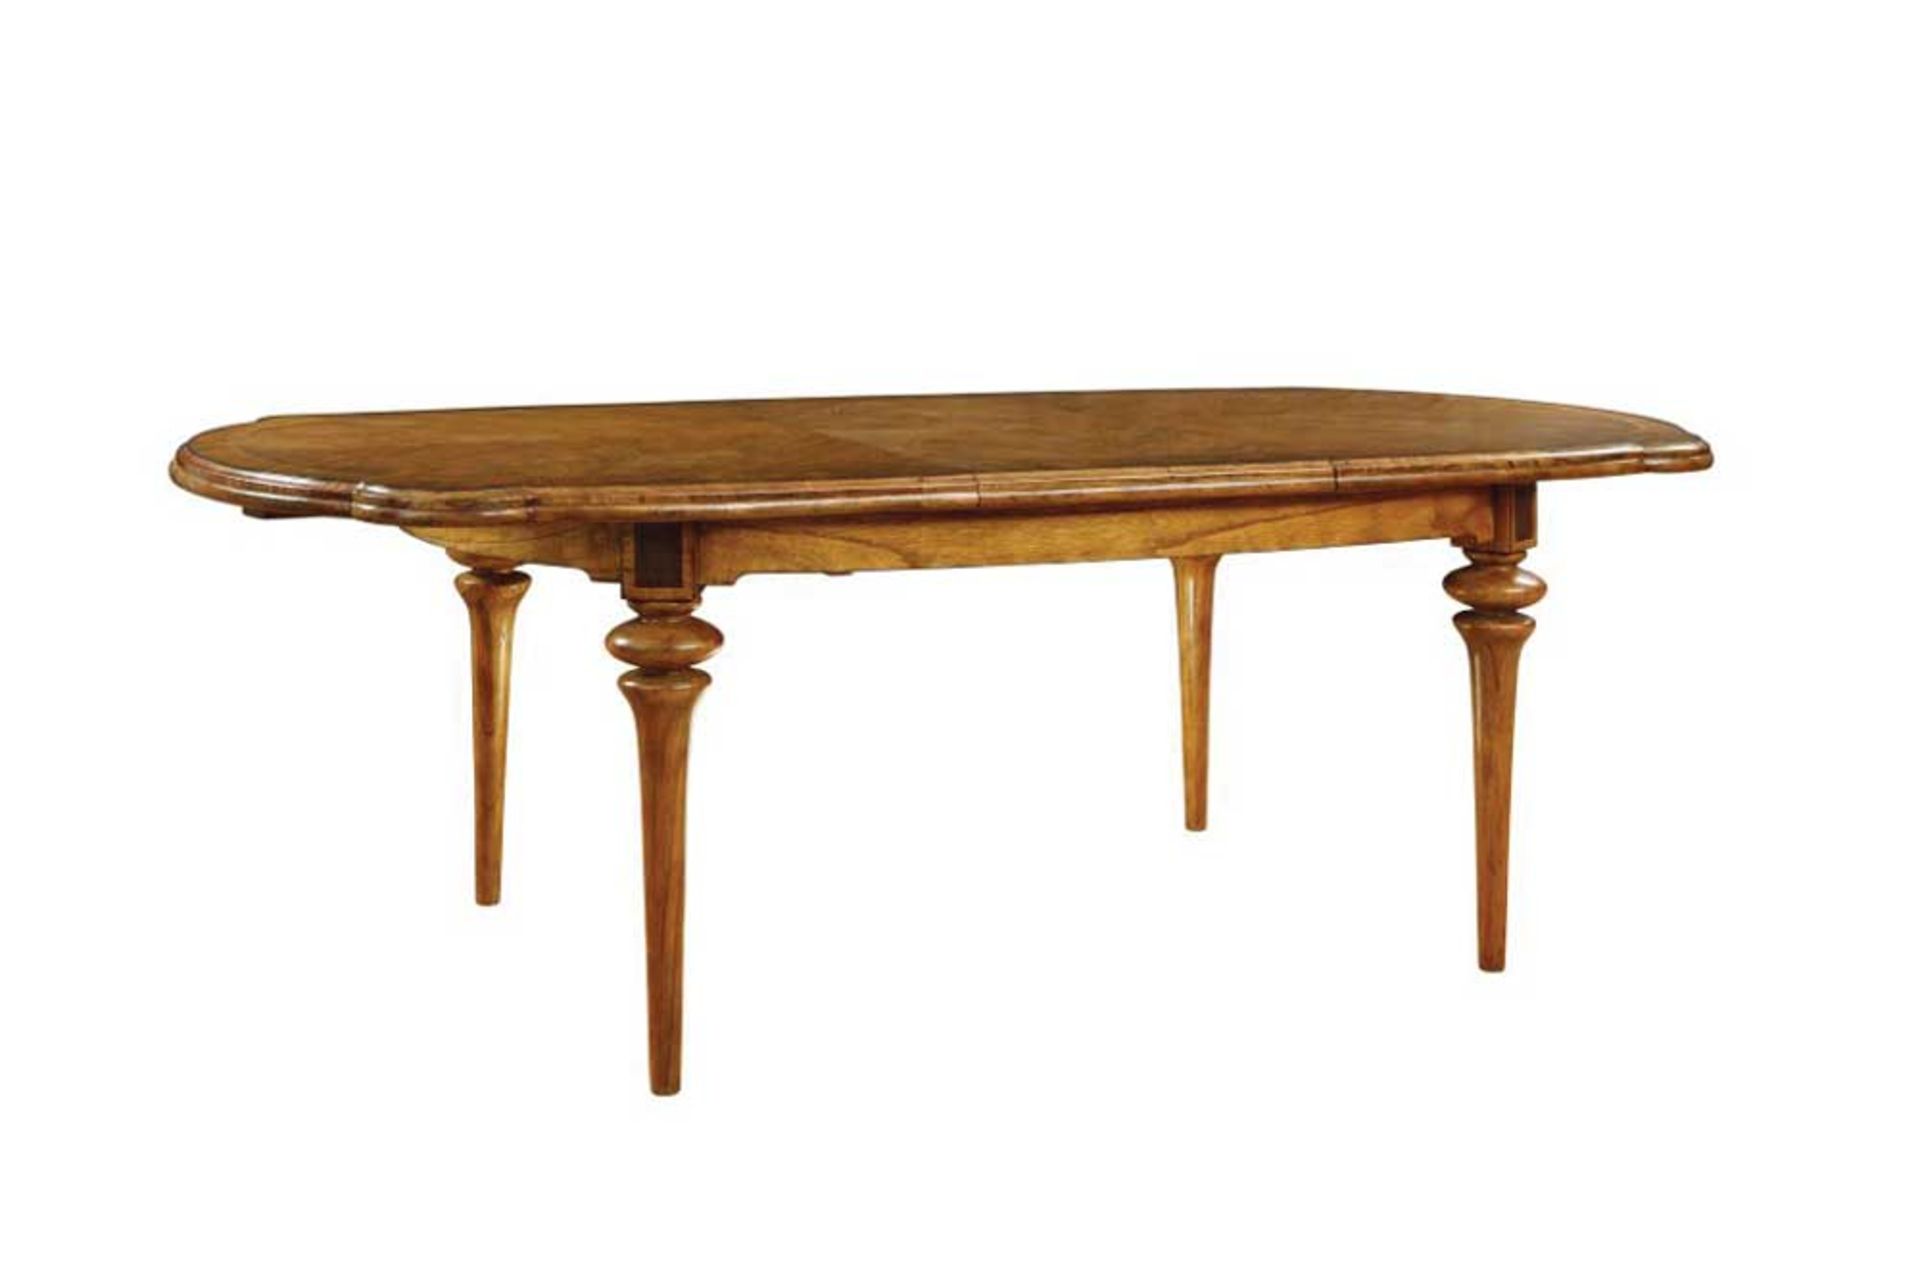 Spire Dining Large Extending Table Blonde European Walnut With Intricate Inlays Antiqued Hand Wax - Image 3 of 3